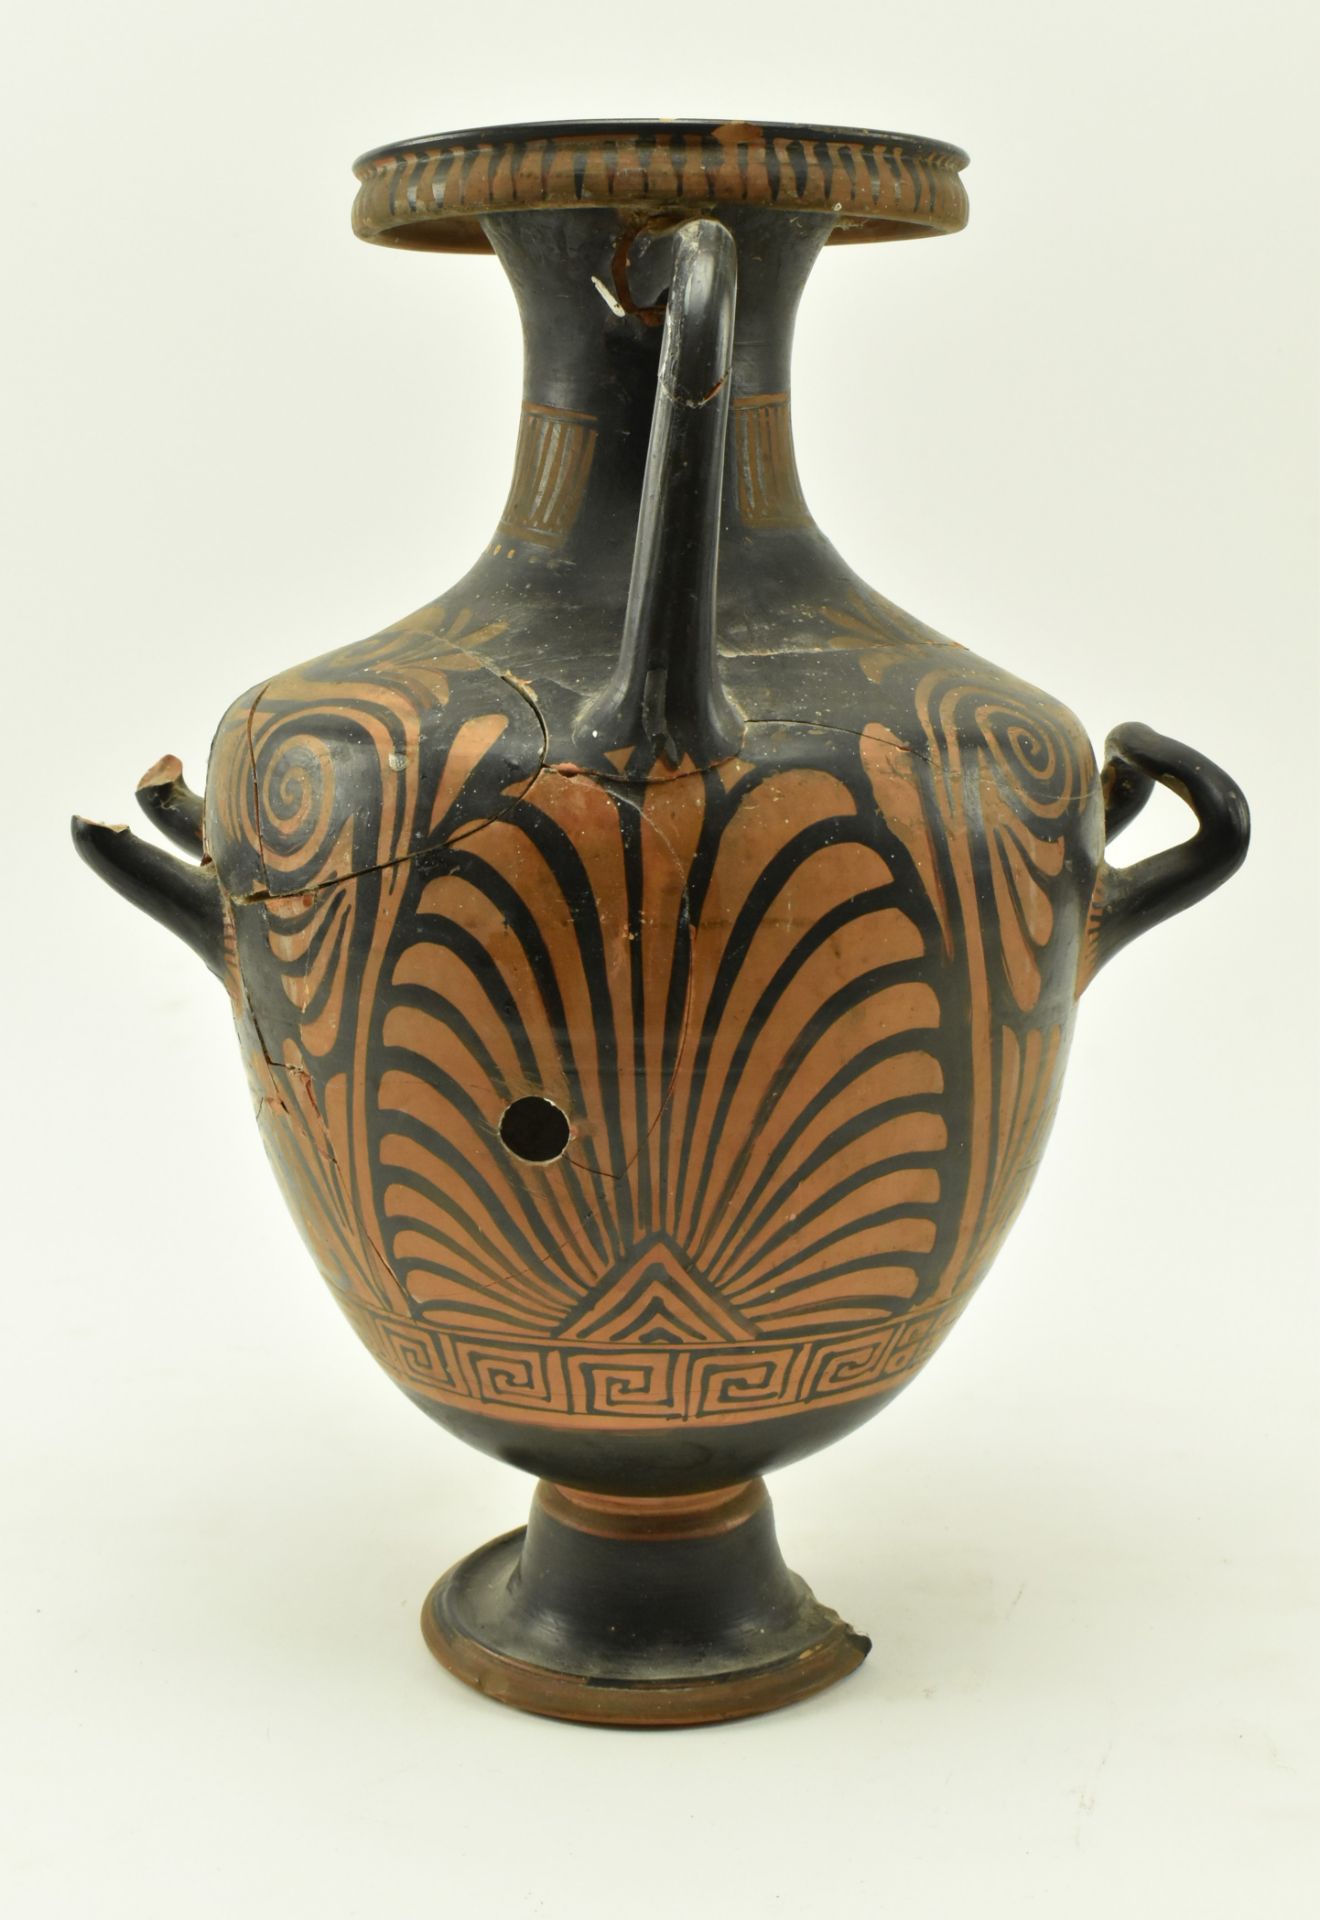 AFTER APULIAN (GREEK) - HAND PAINTED TERRACOTTA HYDRIA VASE - Image 5 of 9